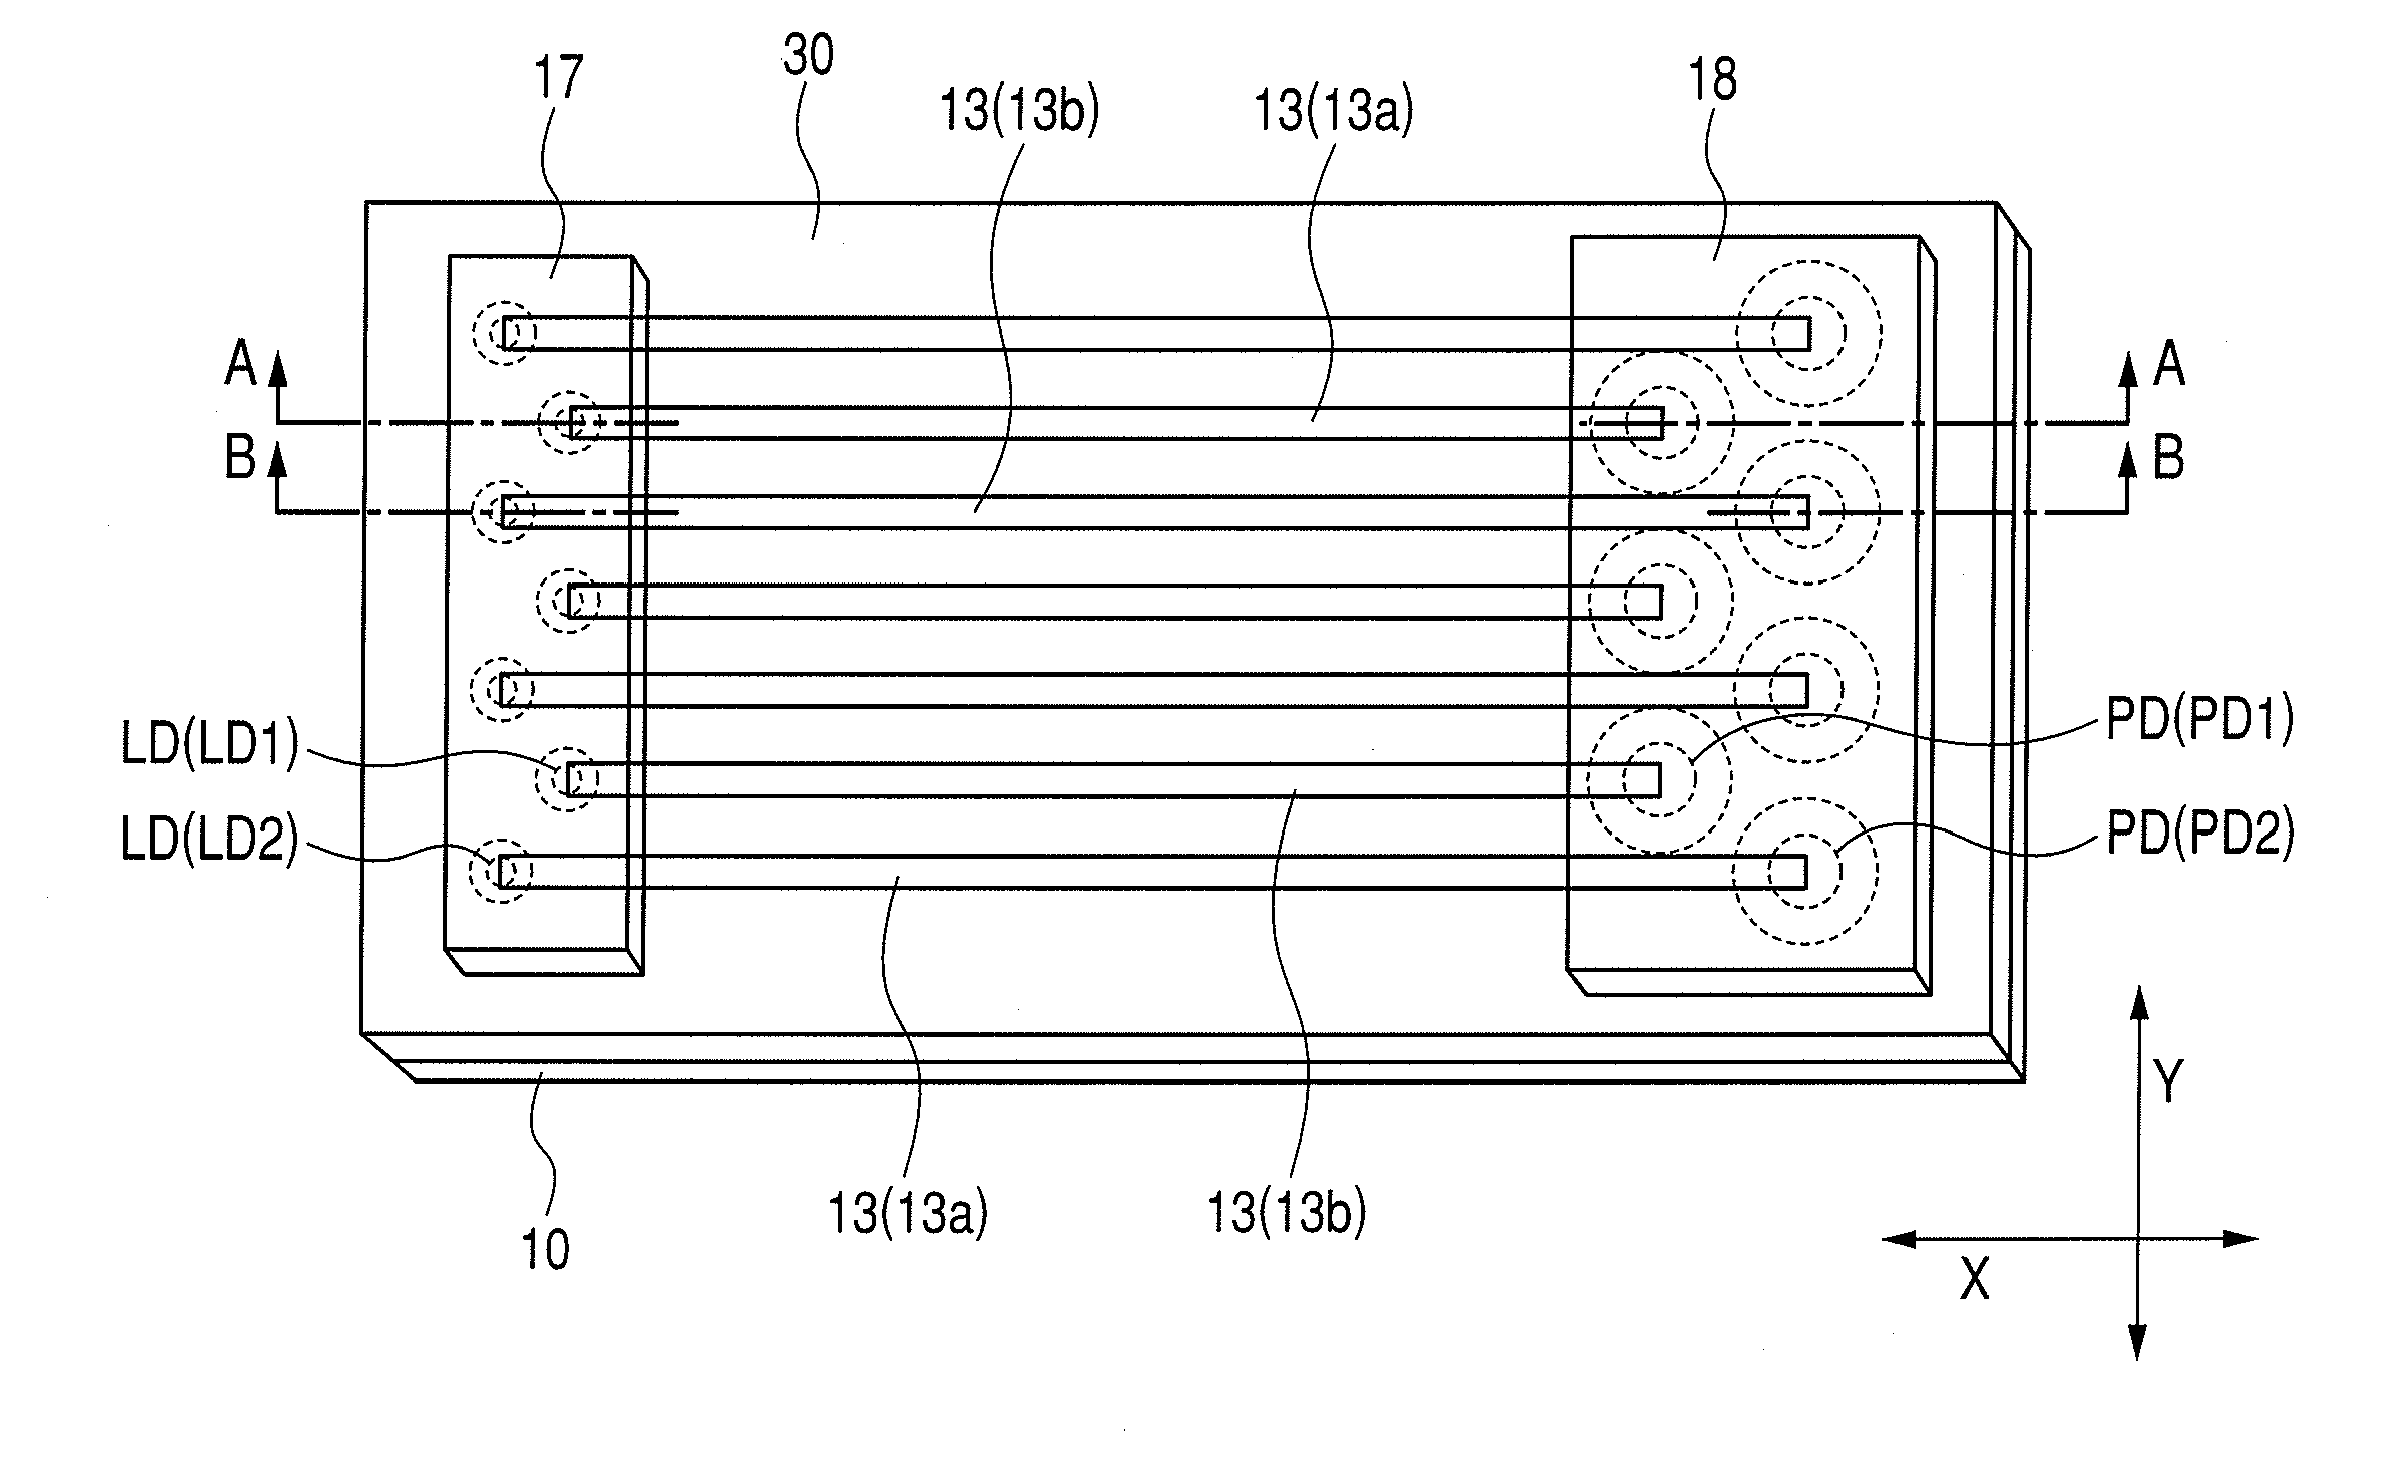 Optical interconnection assembled circuit